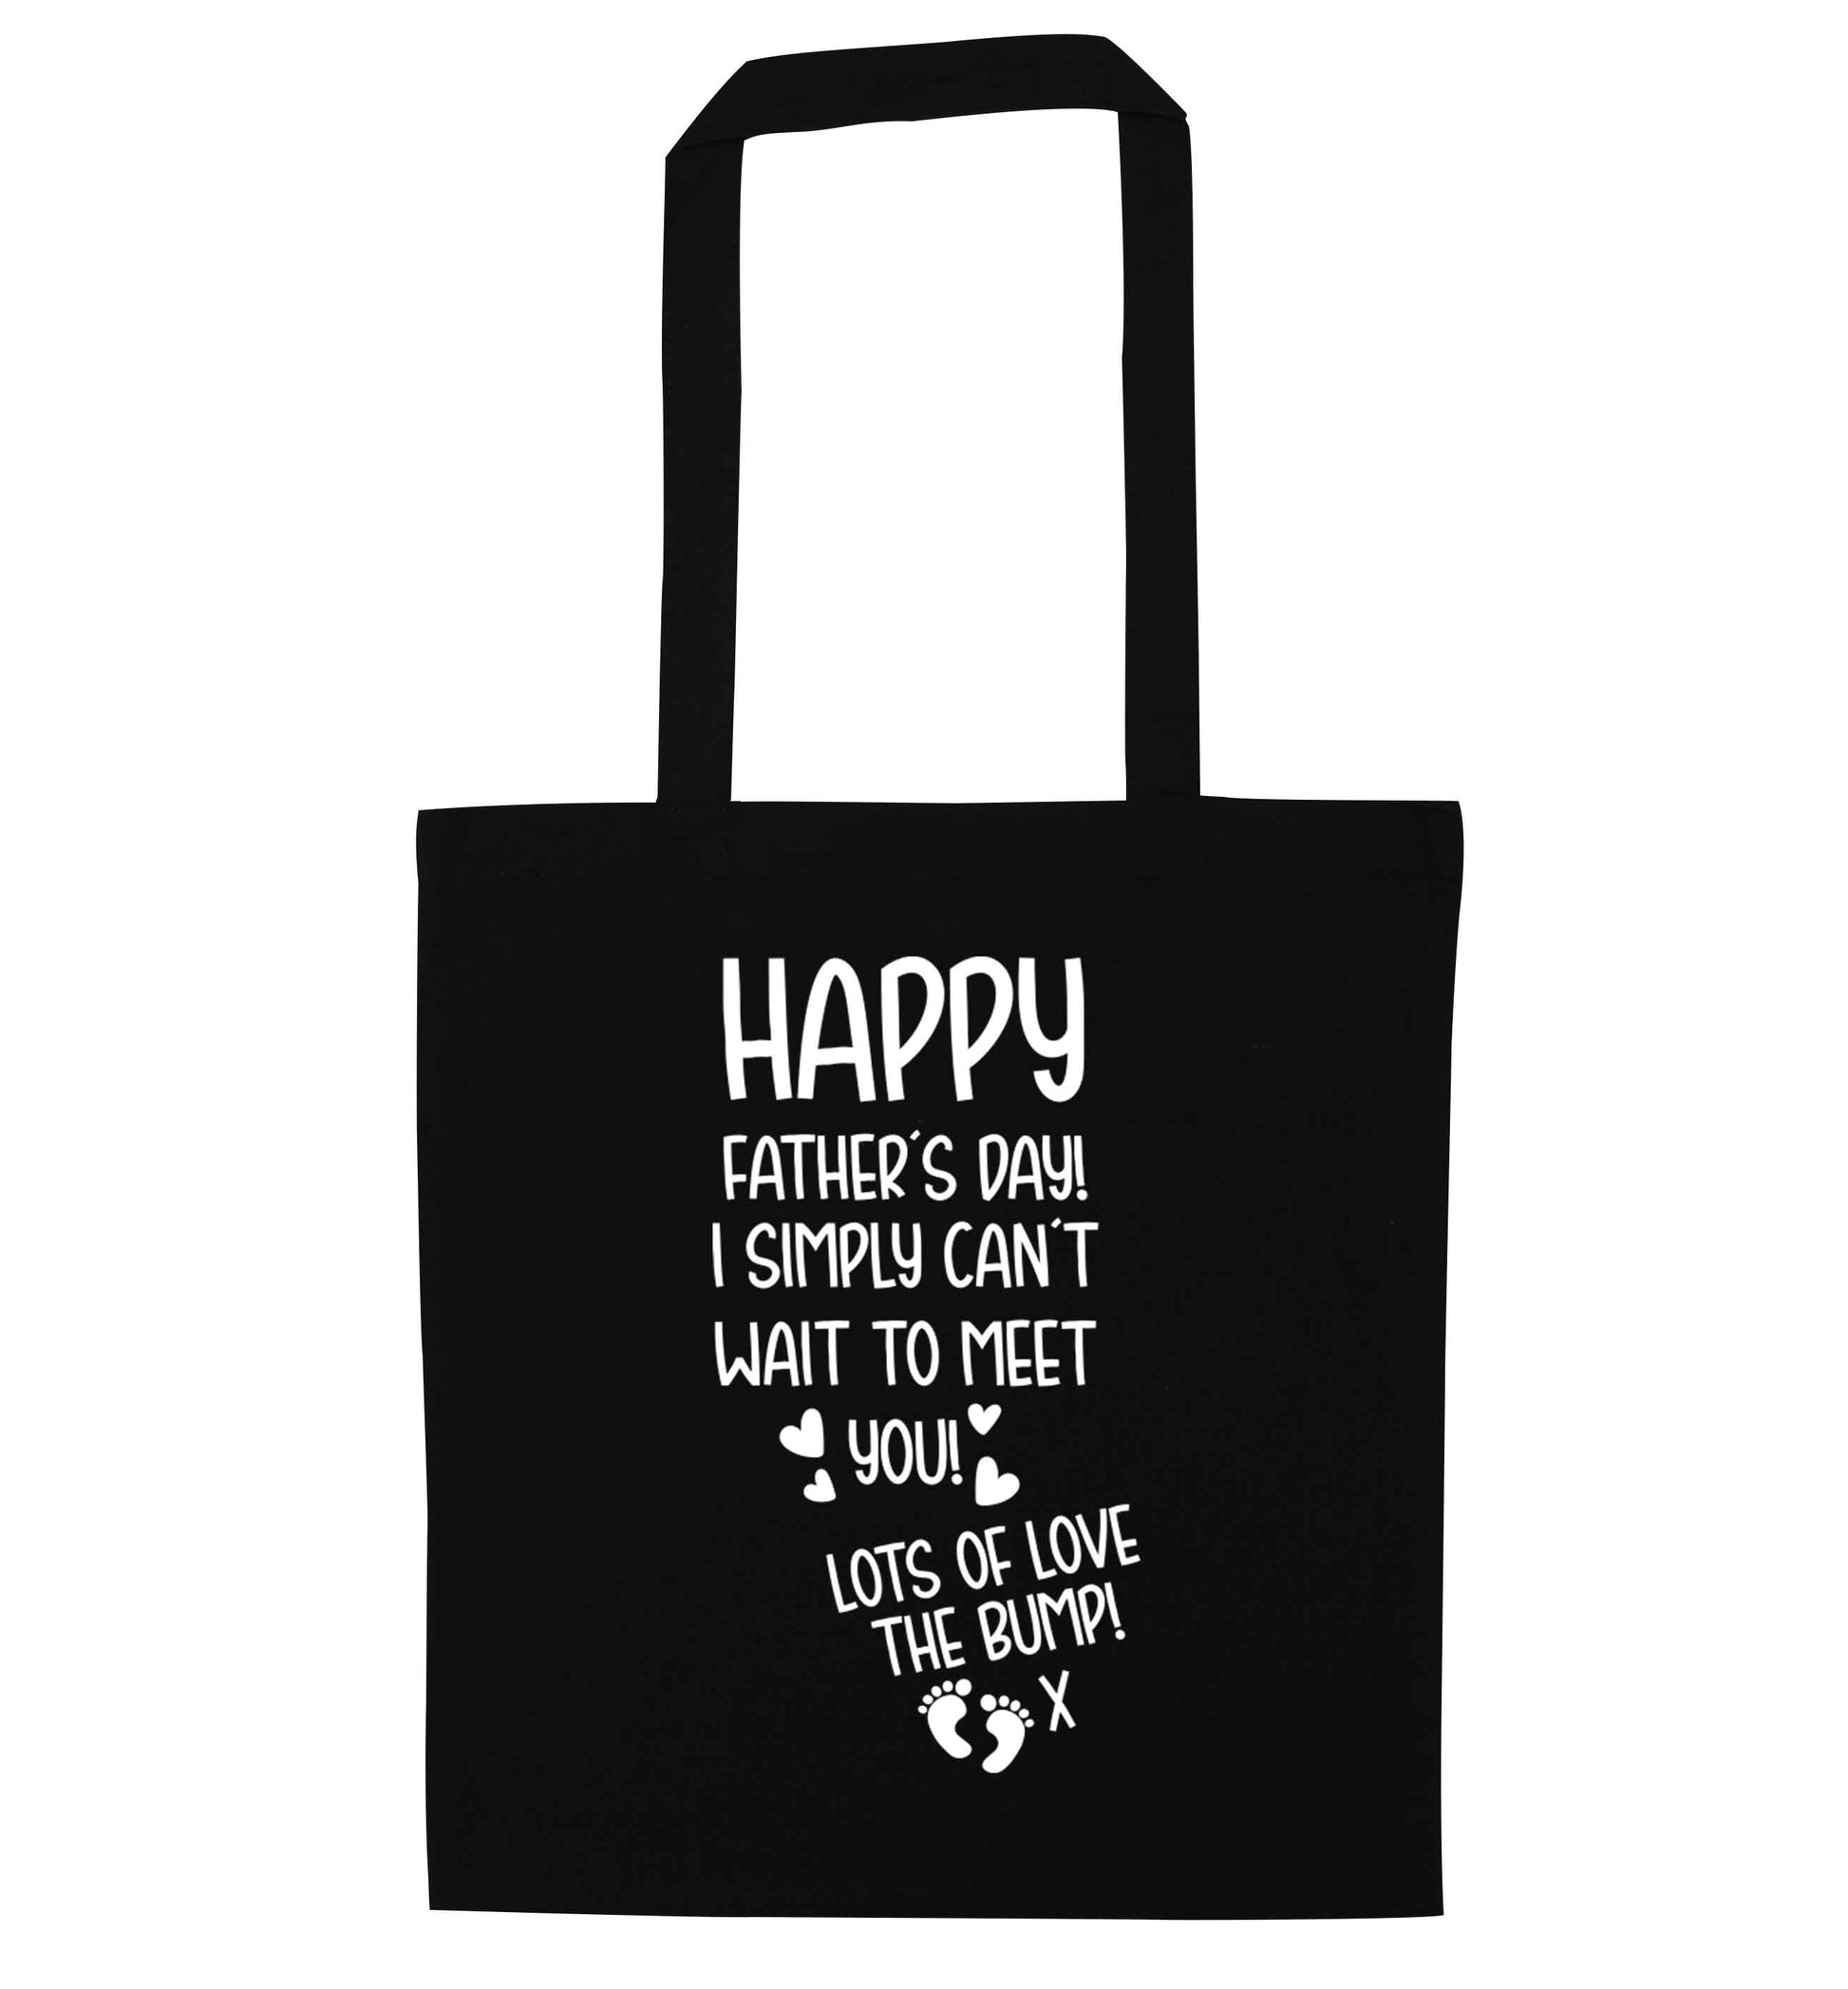 Happy Father's day daddy I can't wait to meet you lot's of love the bump! black tote bag